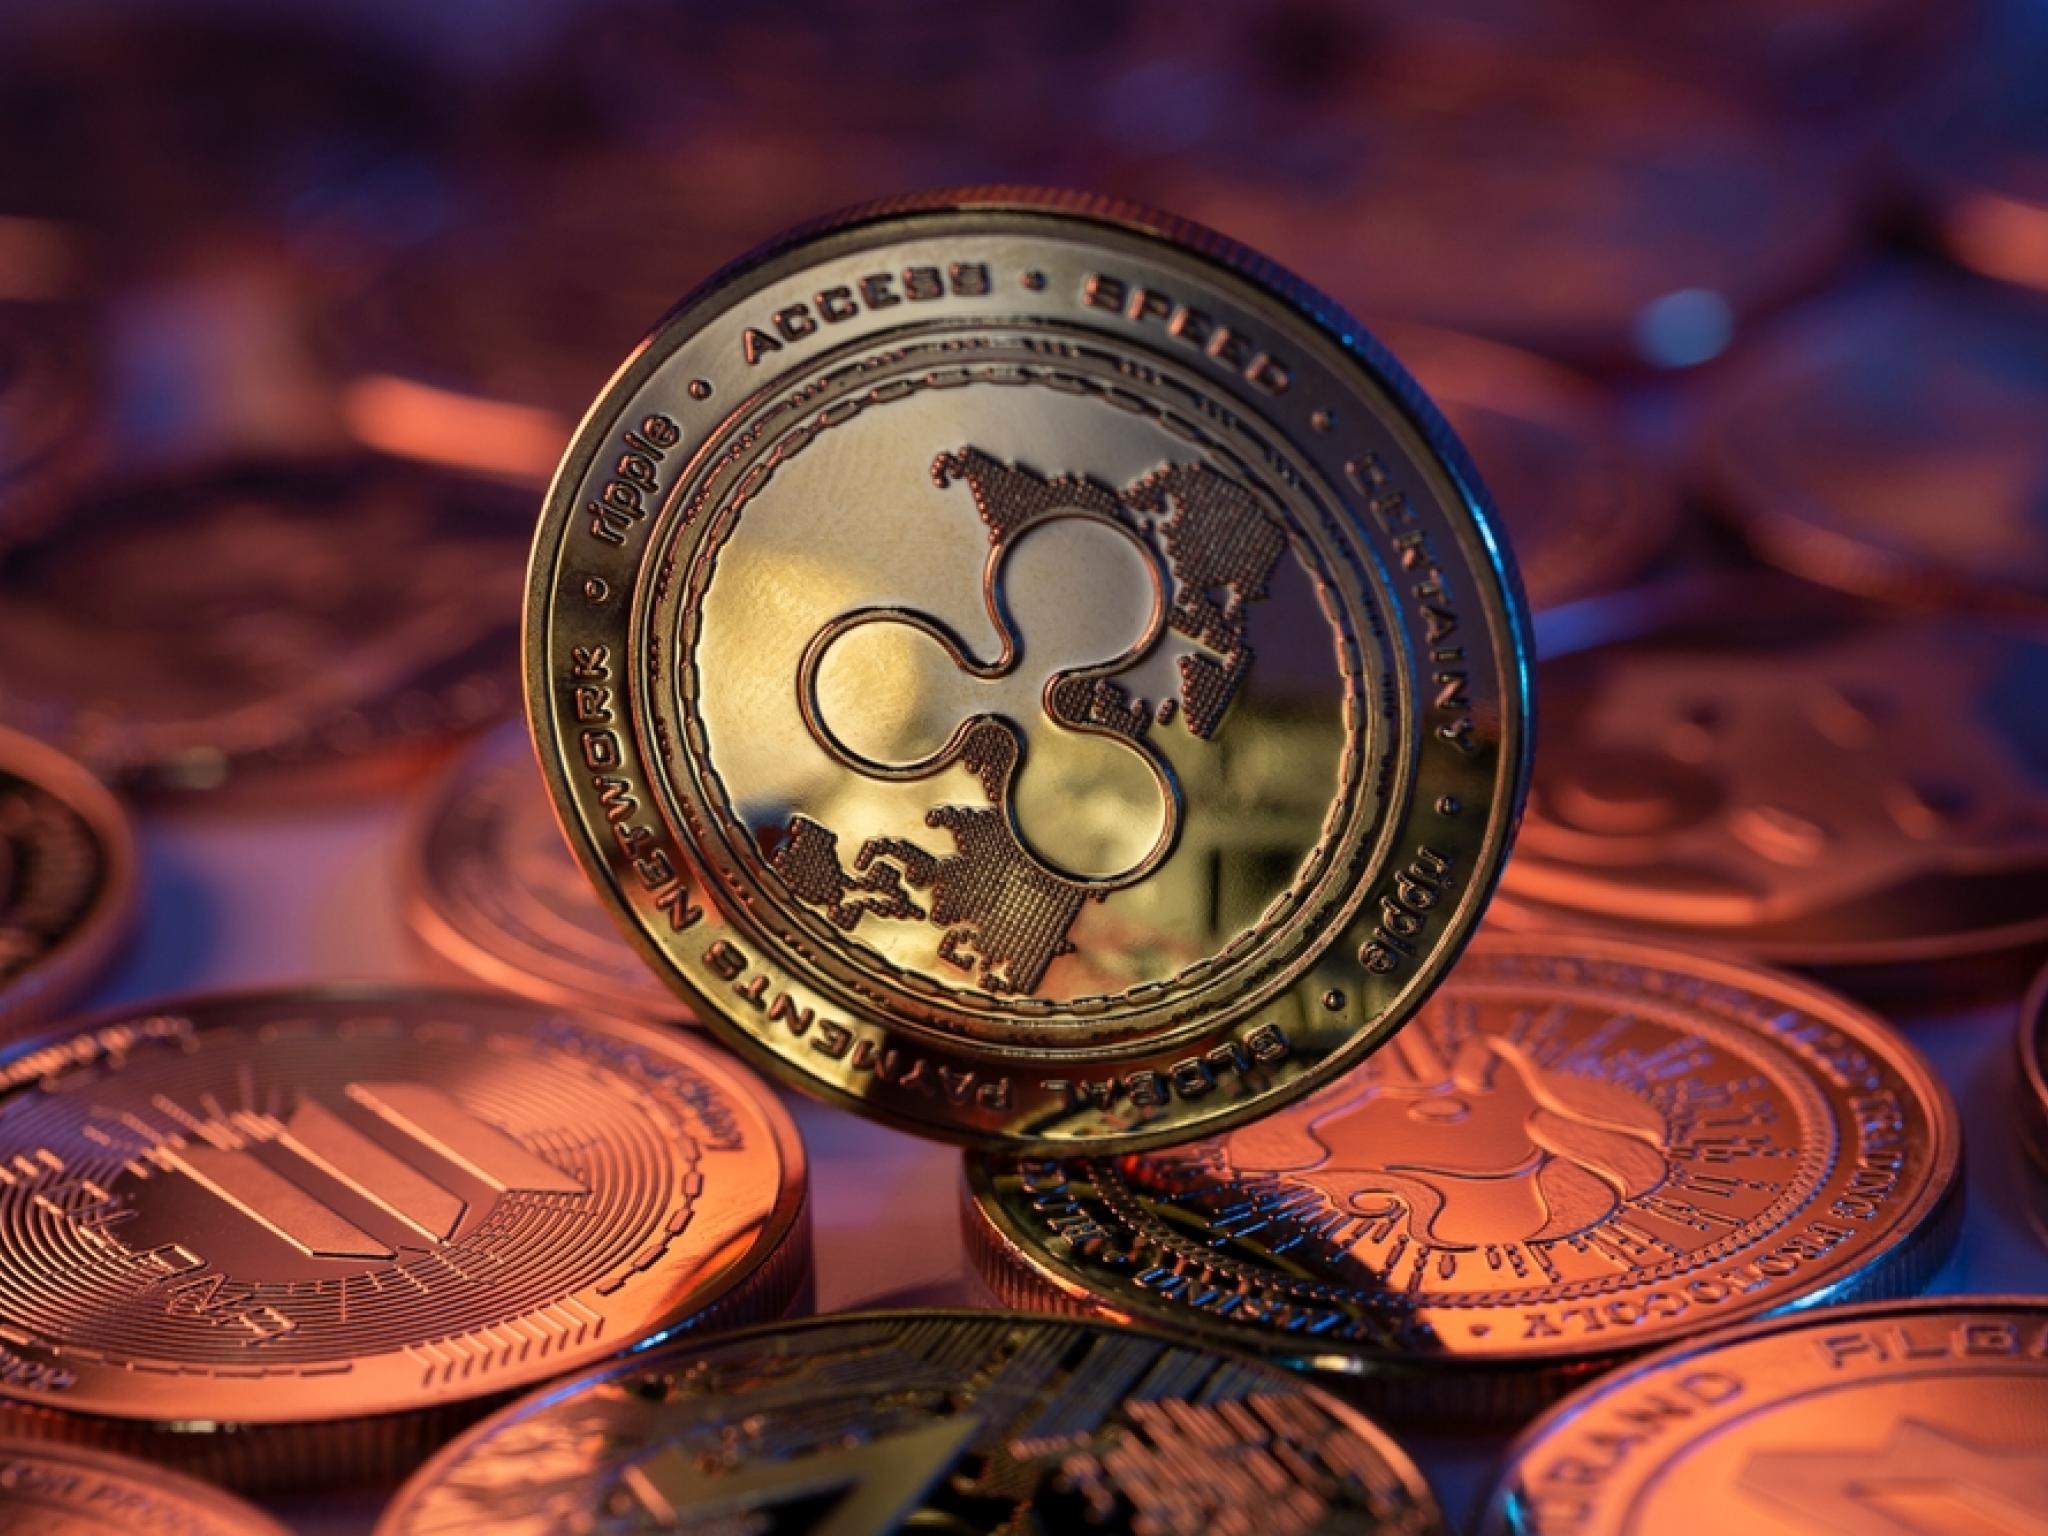  xrp-beats-bitcoin-ethereum-on-launch-of-reference-rate-on-leading-derivatives-exchange-brad-garlinhouse-says-first-step-toward-institutional-crypto-products 